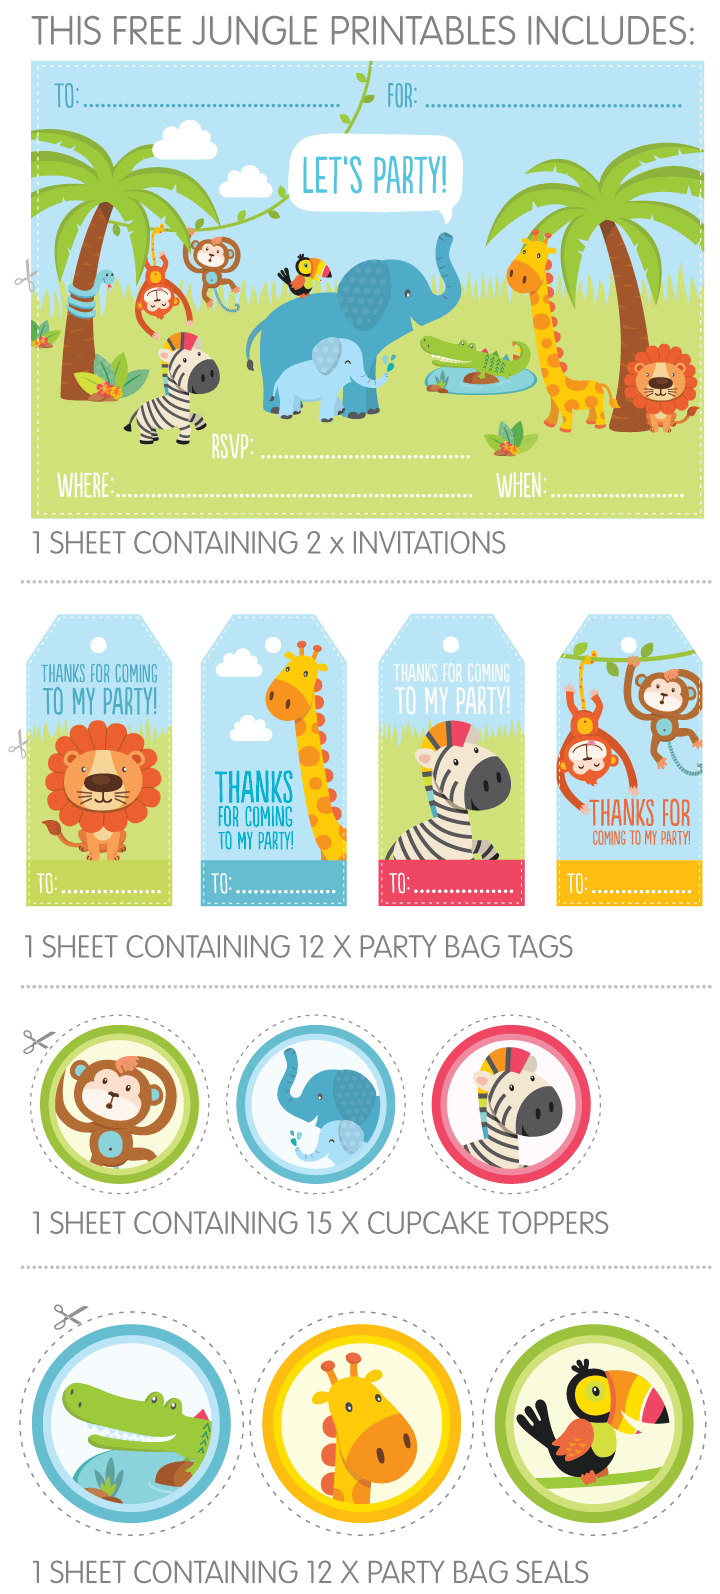 Free Jungle Party Invitation Printables | Give-Aways | Jungle Party - Jungle Theme Birthday Invitations Free Printable